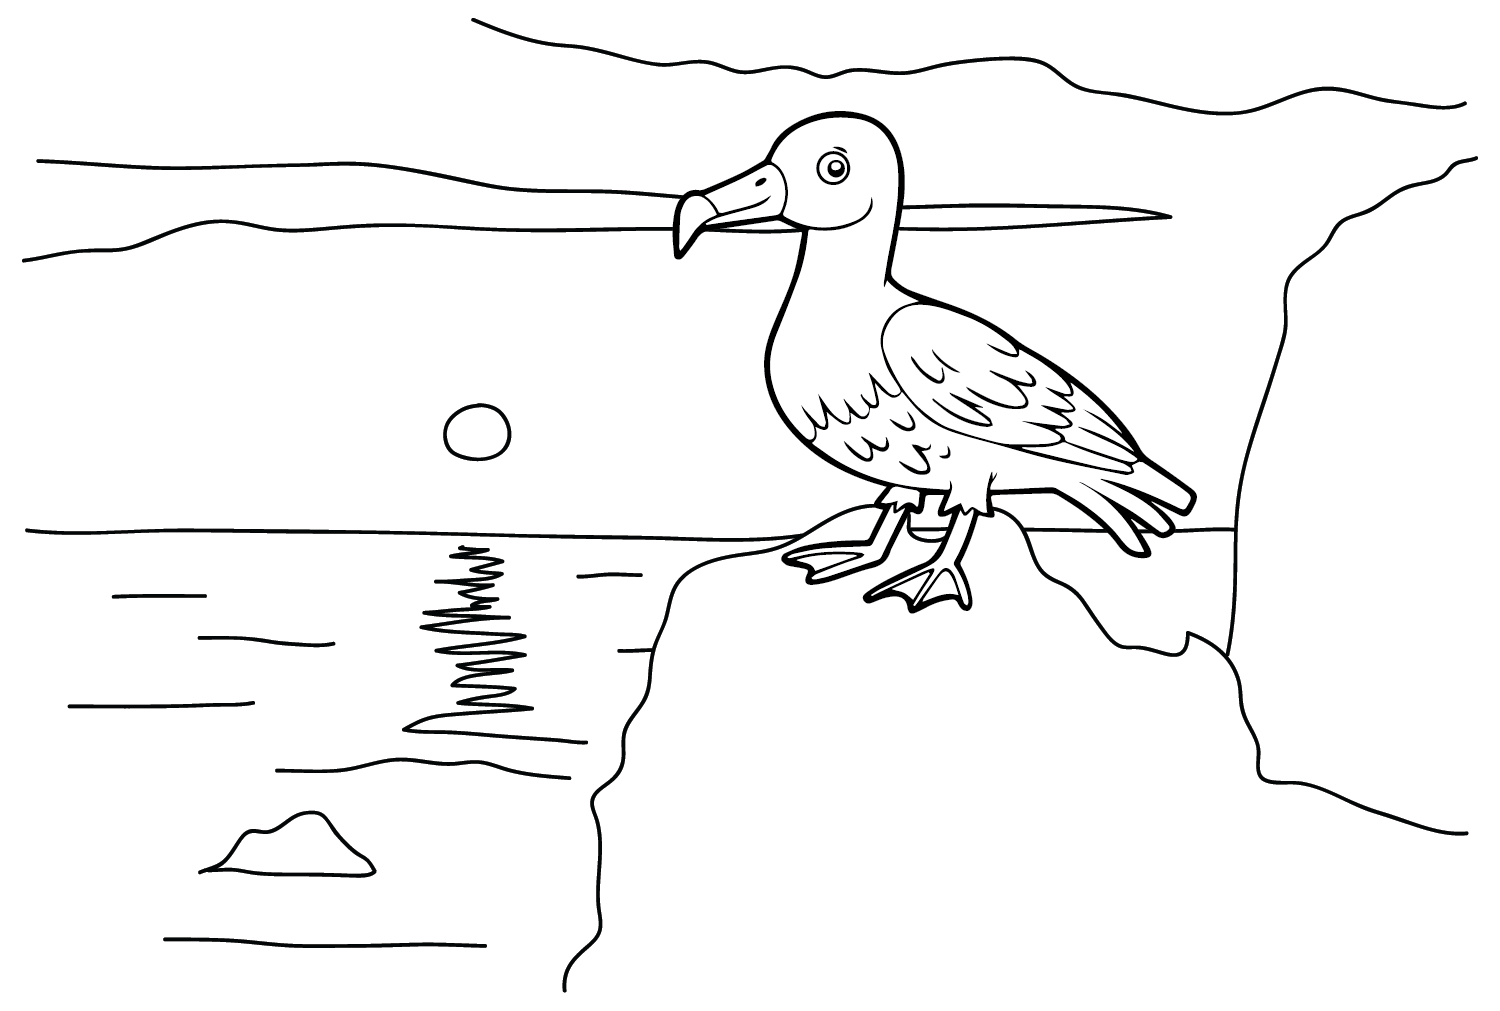 Albatross Coloring Pages to Download from Albatross